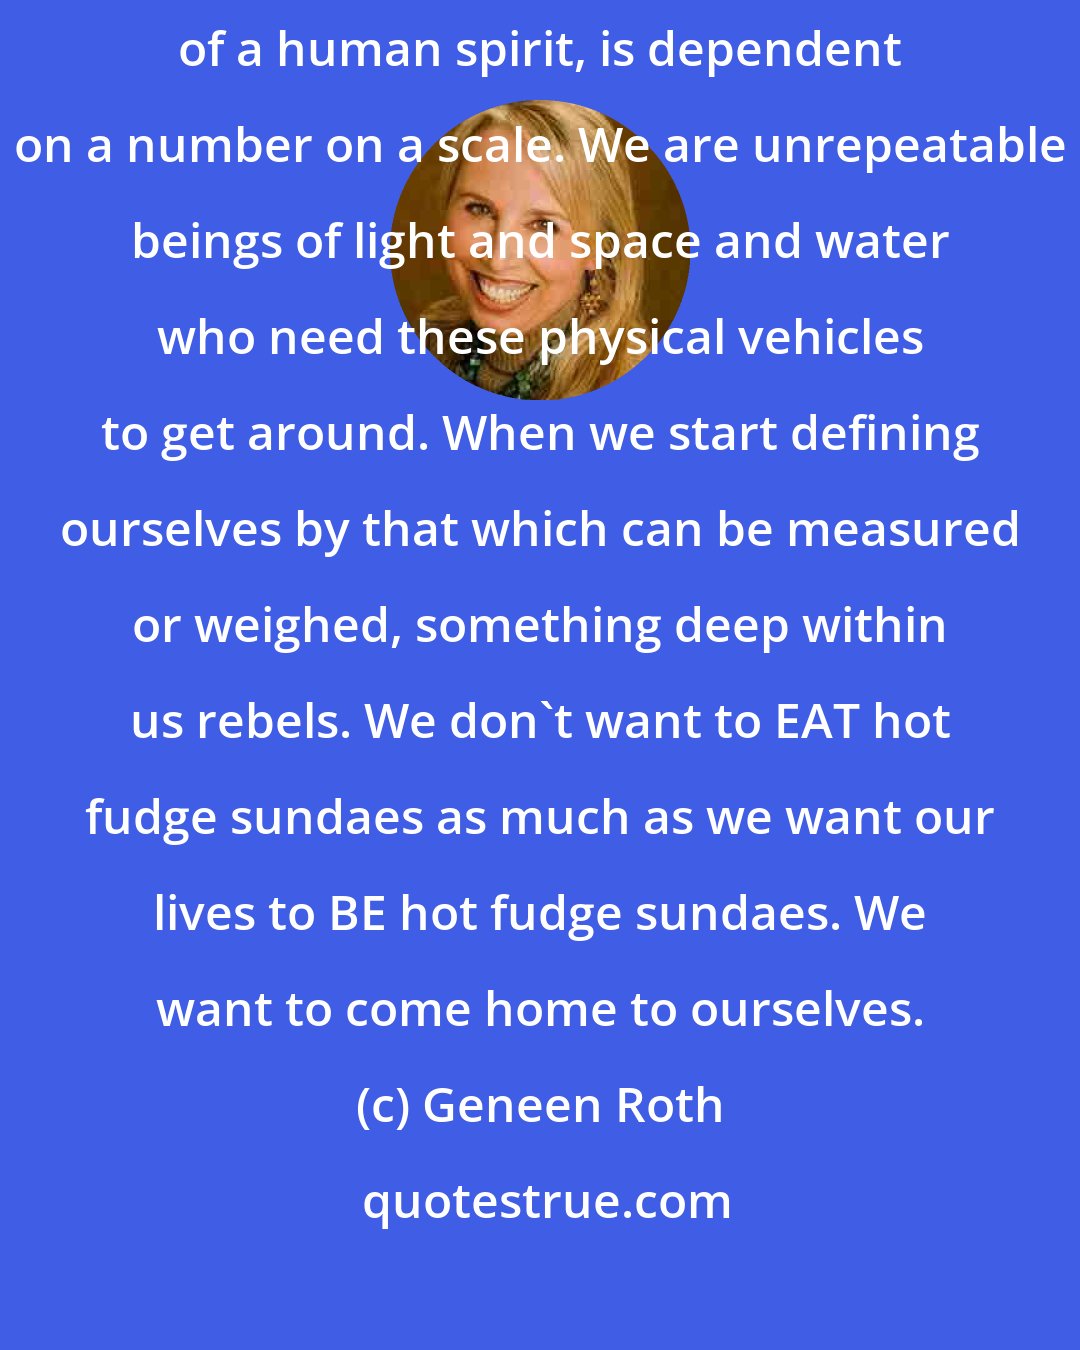 Geneen Roth: It's never been true, not anywhere at any time, that the value of a soul, of a human spirit, is dependent on a number on a scale. We are unrepeatable beings of light and space and water who need these physical vehicles to get around. When we start defining ourselves by that which can be measured or weighed, something deep within us rebels. We don't want to EAT hot fudge sundaes as much as we want our lives to BE hot fudge sundaes. We want to come home to ourselves.